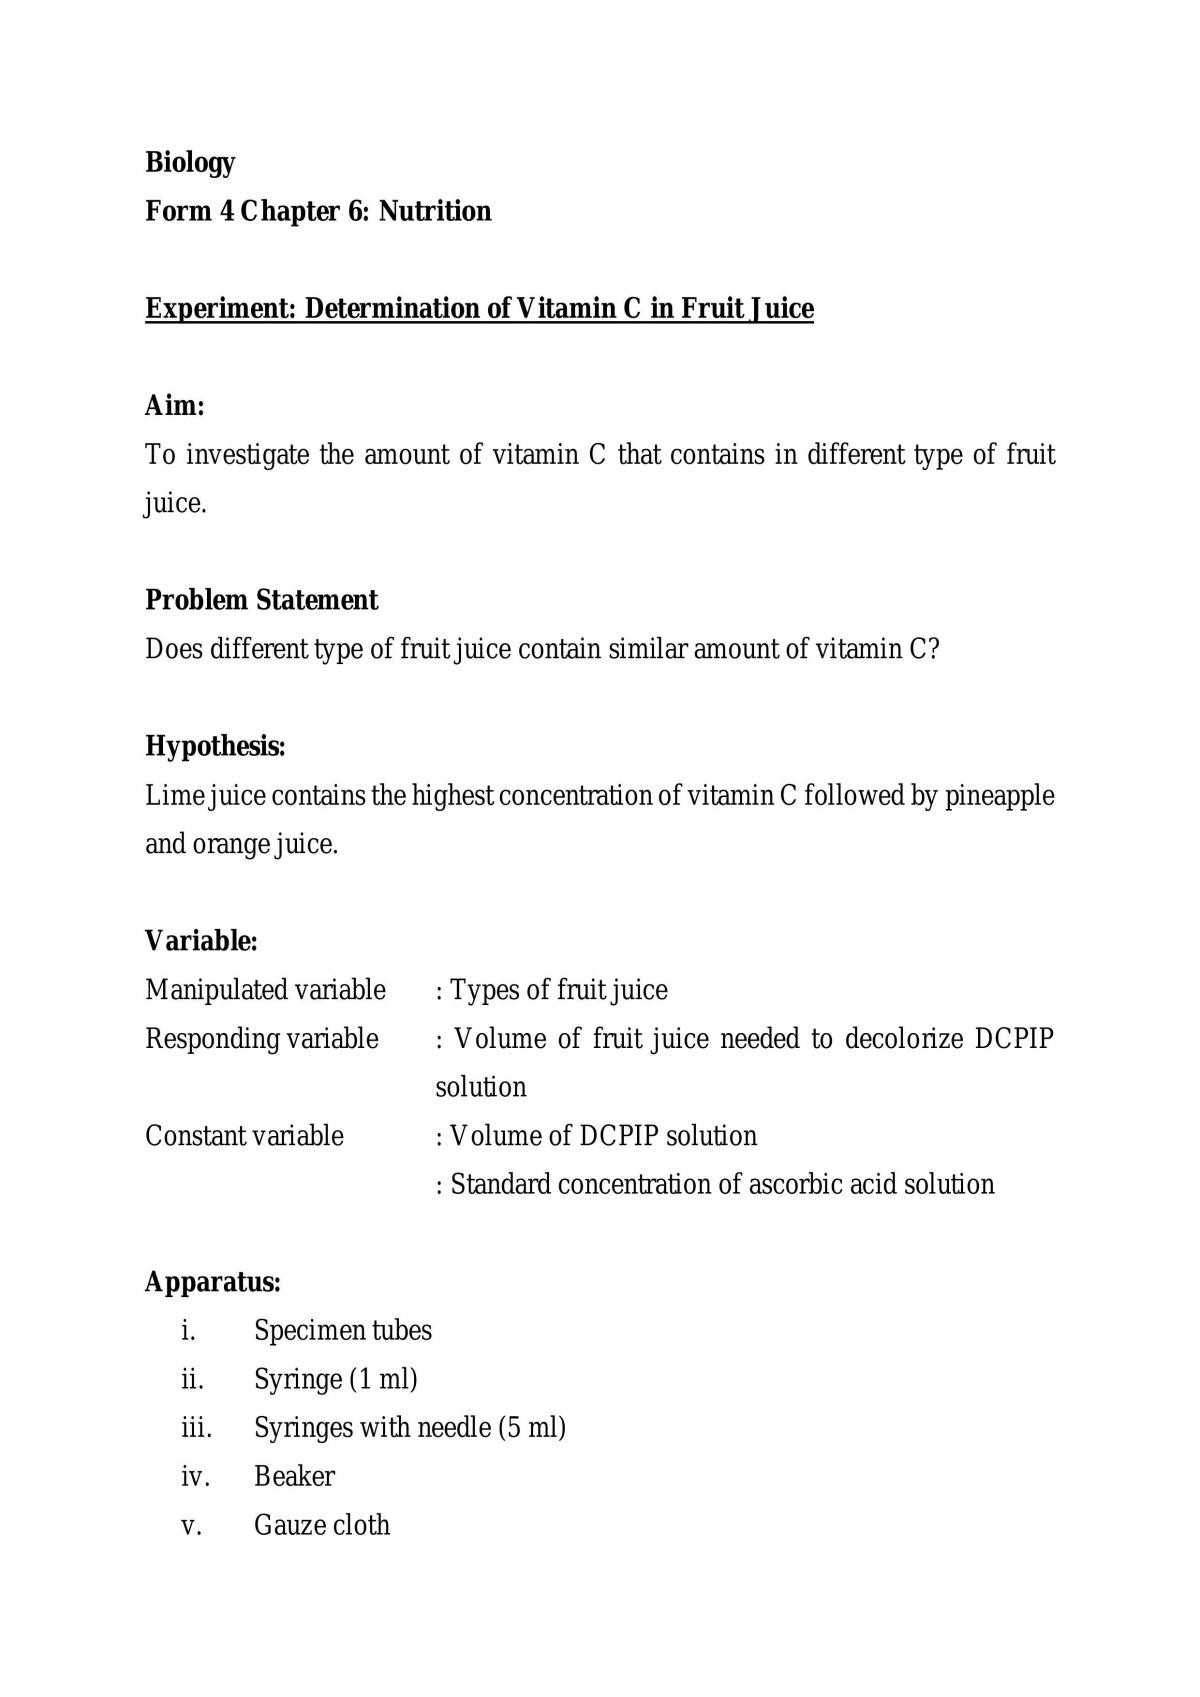 Experiment Determination of Amount of Vitamin C in Fruit Juices - Page 1